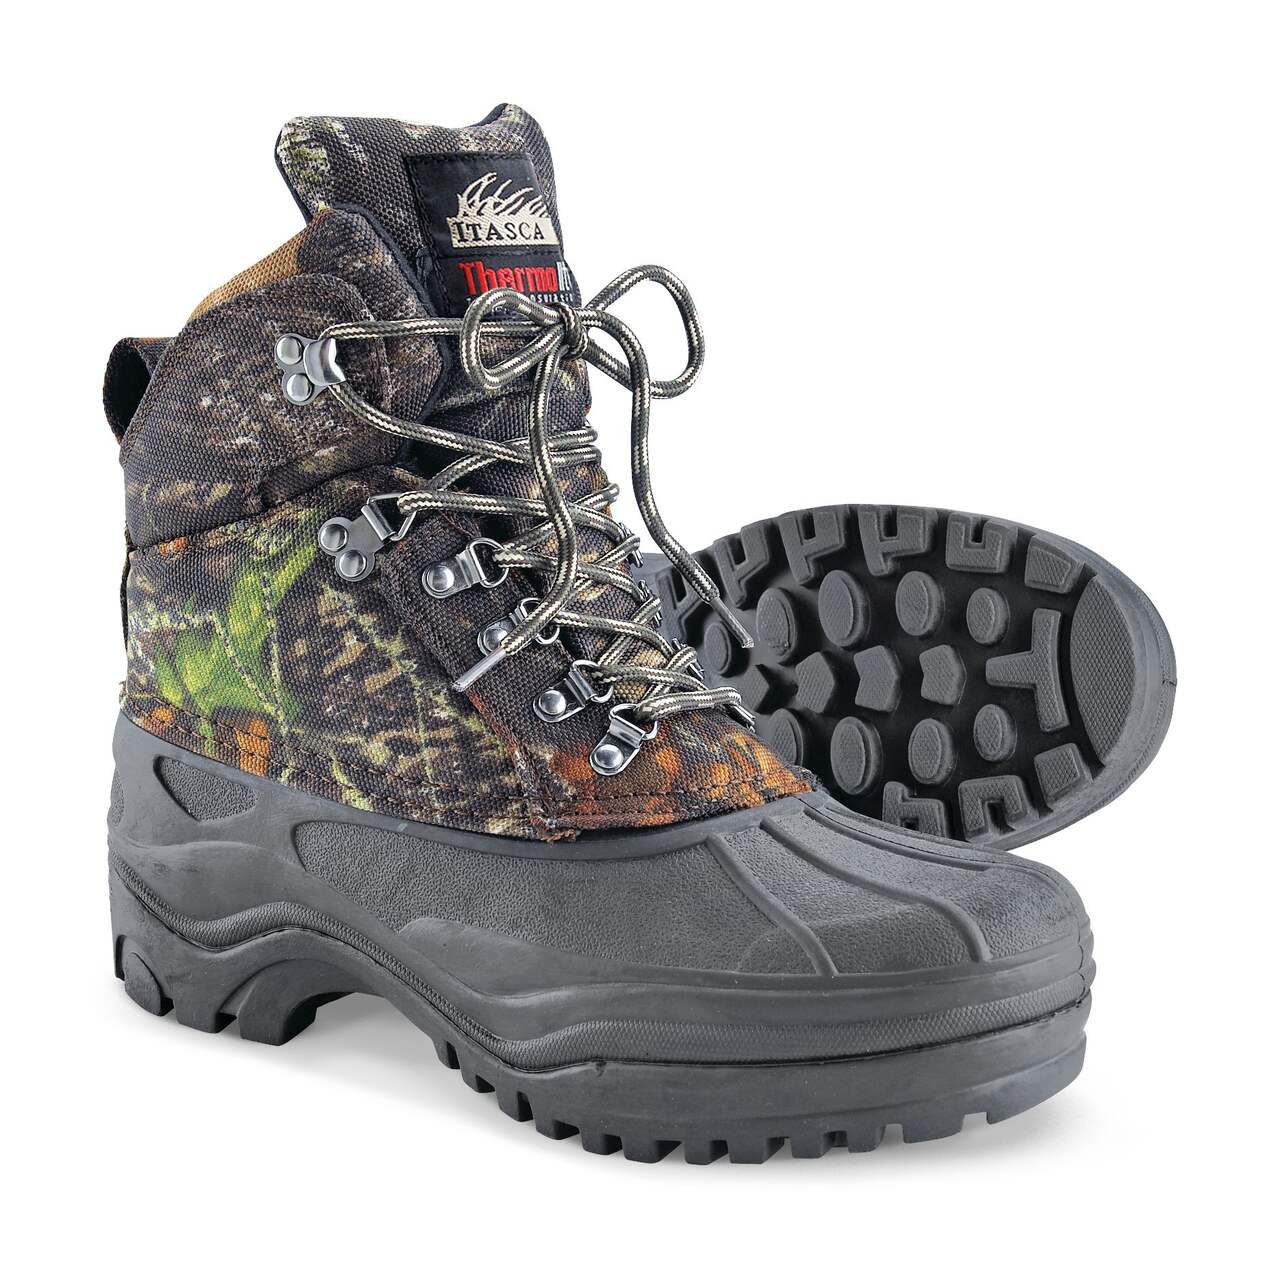 https://media-www.canadiantire.ca/product/playing/hunting/hunting-apparel-footwear/0873352/icebreaker-tpr-shell-hunting-boot-size-8-e46294f1-7176-48f8-9ef6-605f68206402-jpgrendition.jpg?imdensity=1&imwidth=640&impolicy=mZoom